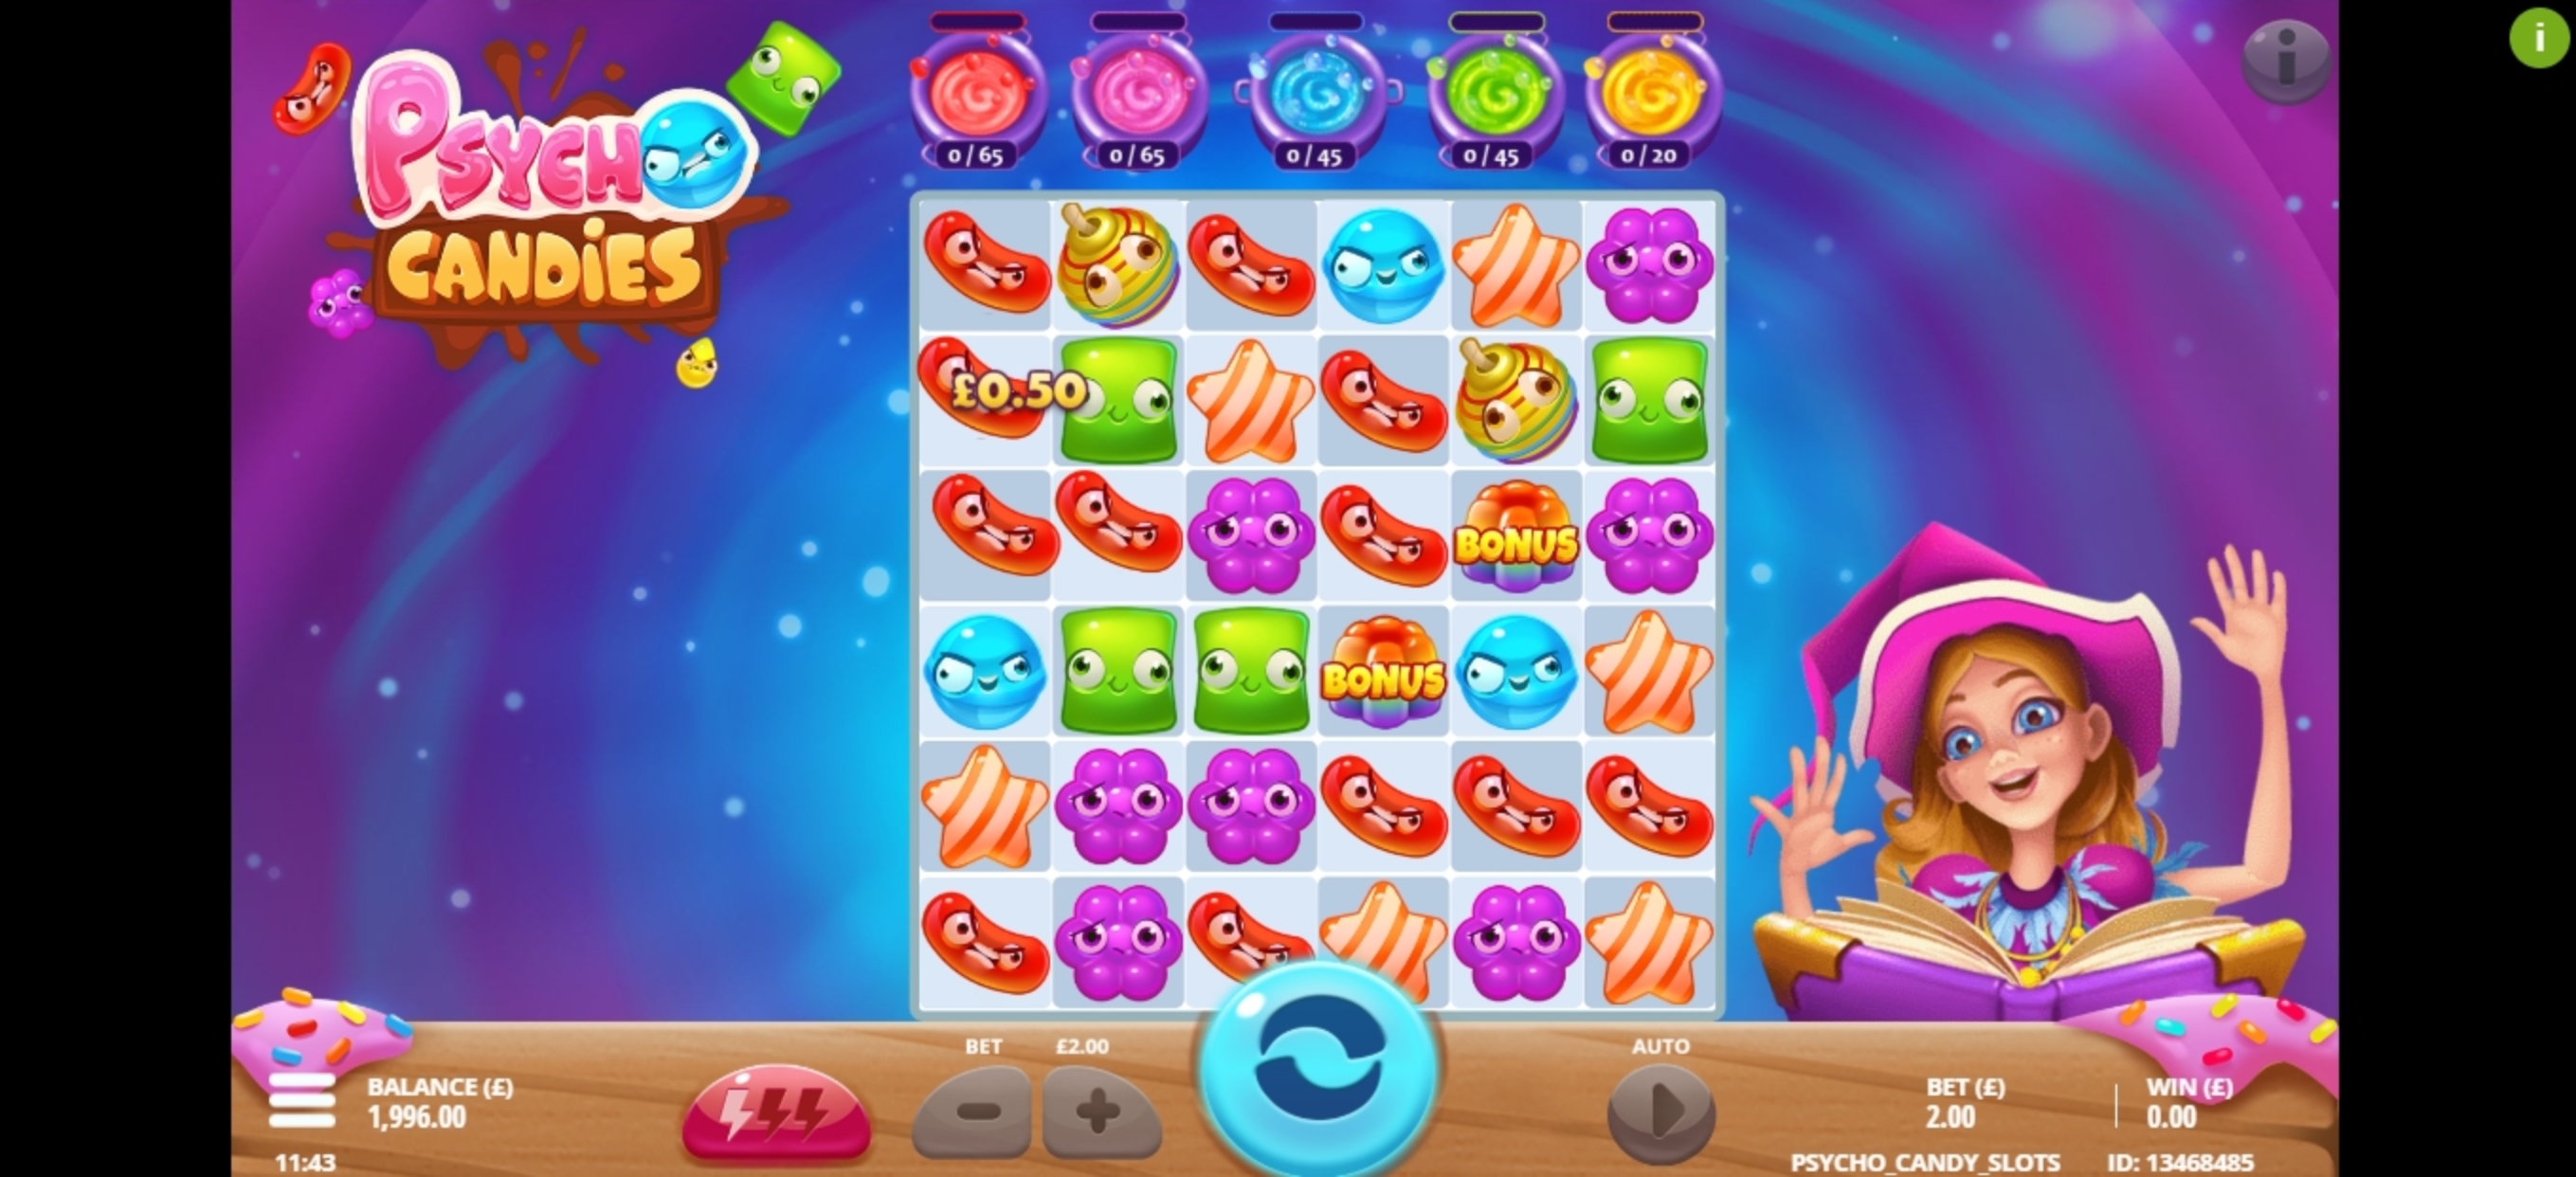 Win Money in Psycho Candies Free Slot Game by Gluck Games